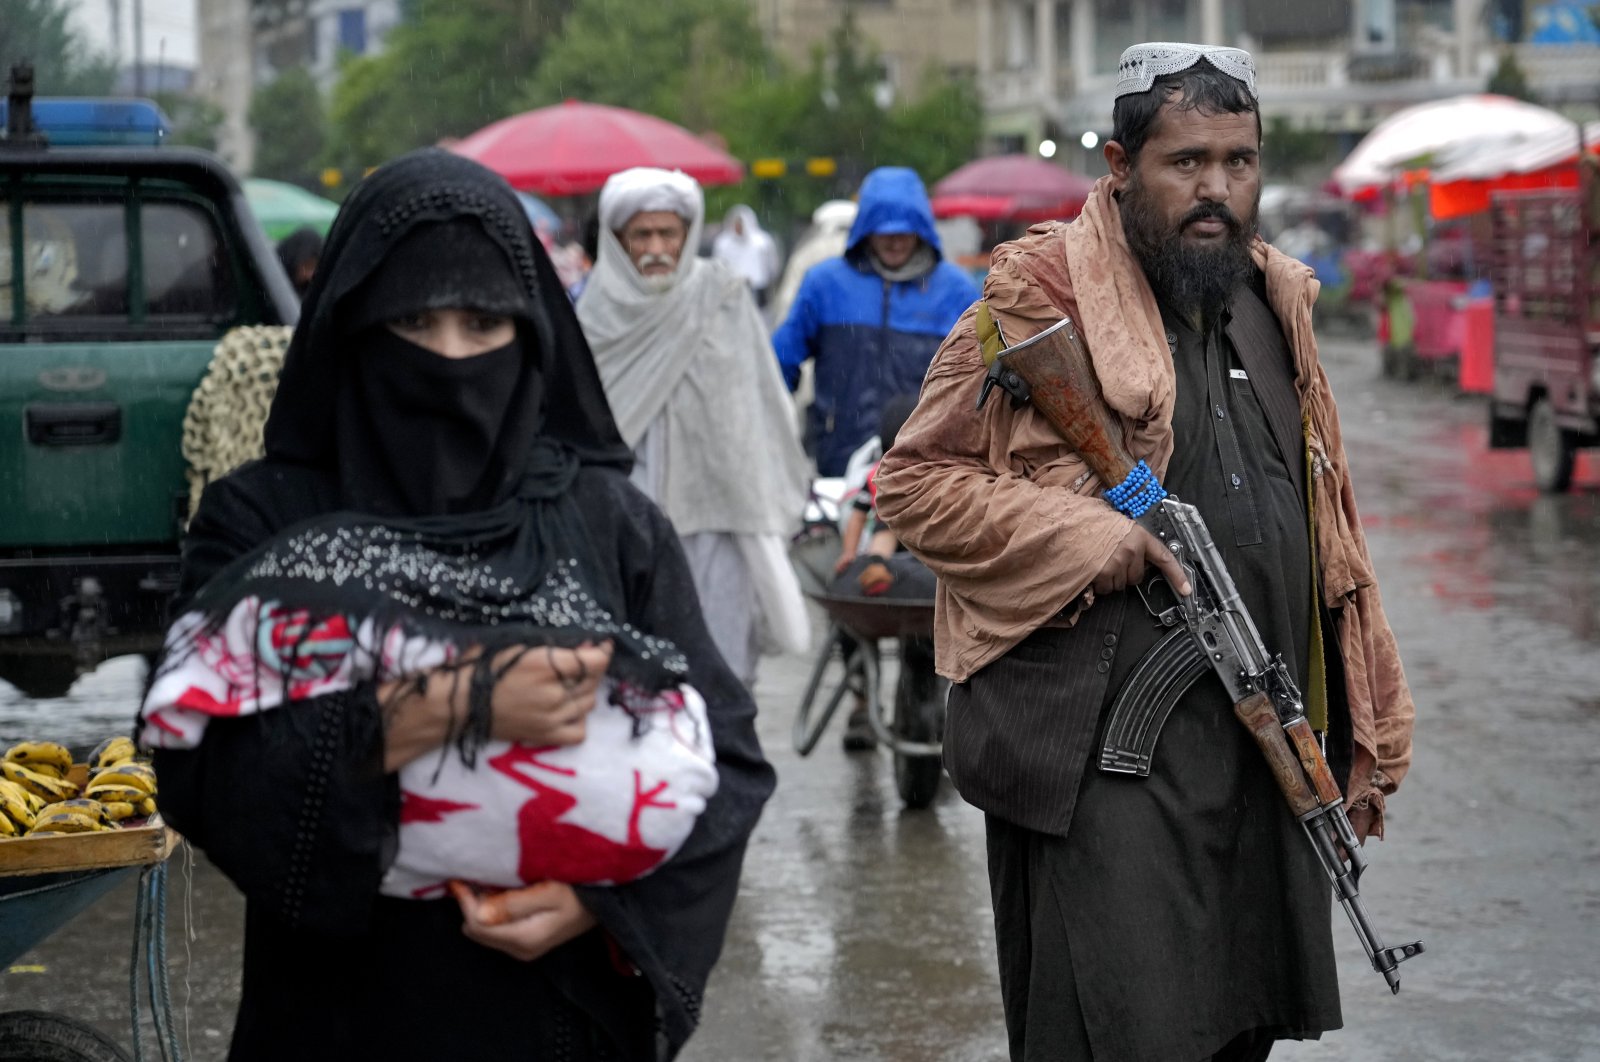 A Taliban fighter stands guard as people walk through the old market, in the city of Kabul, Afghanistan, Tuesday, May 3, 2022. (AP Photo)